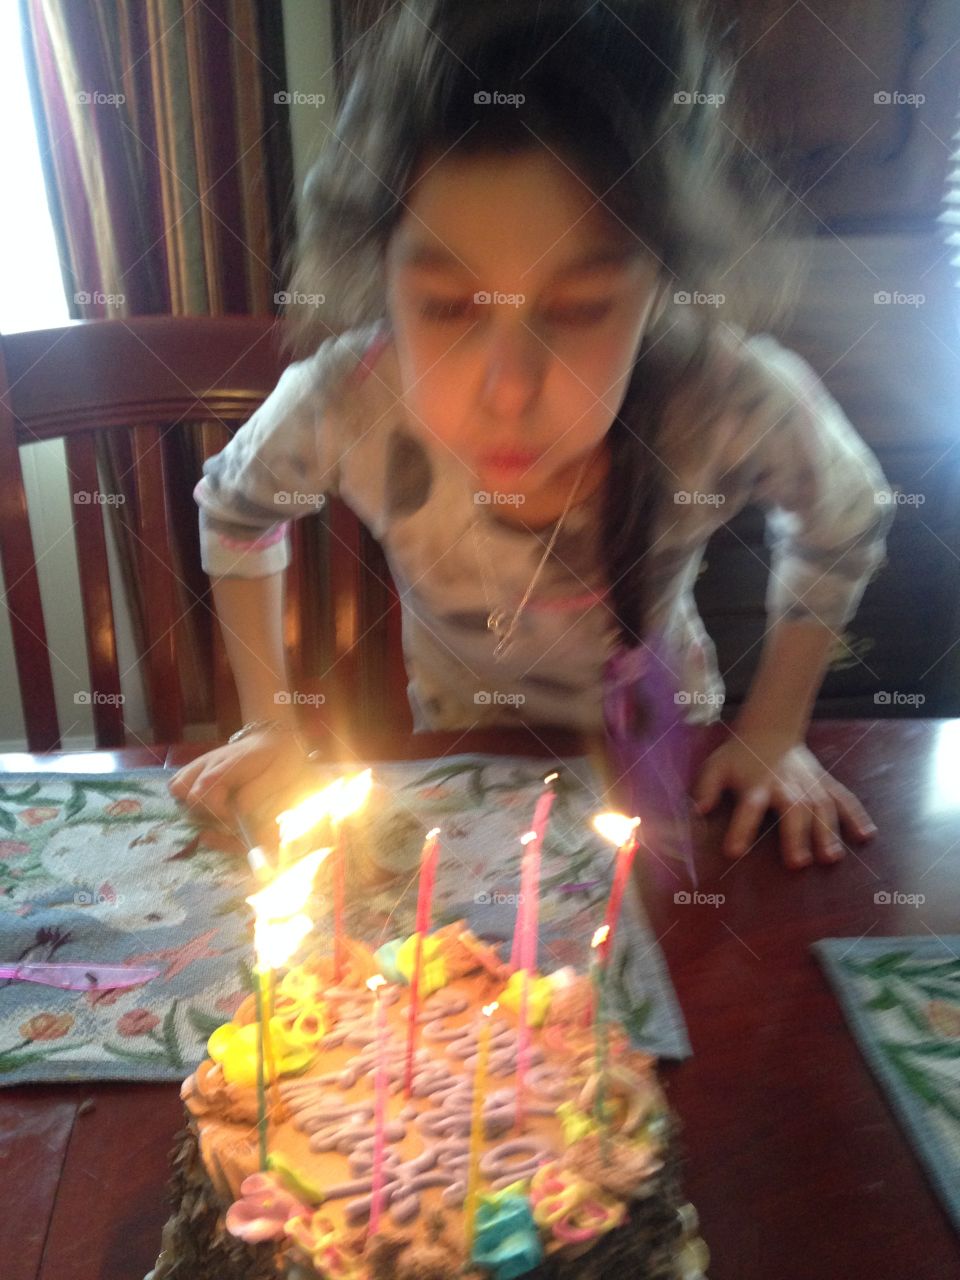 Blow out those candles!